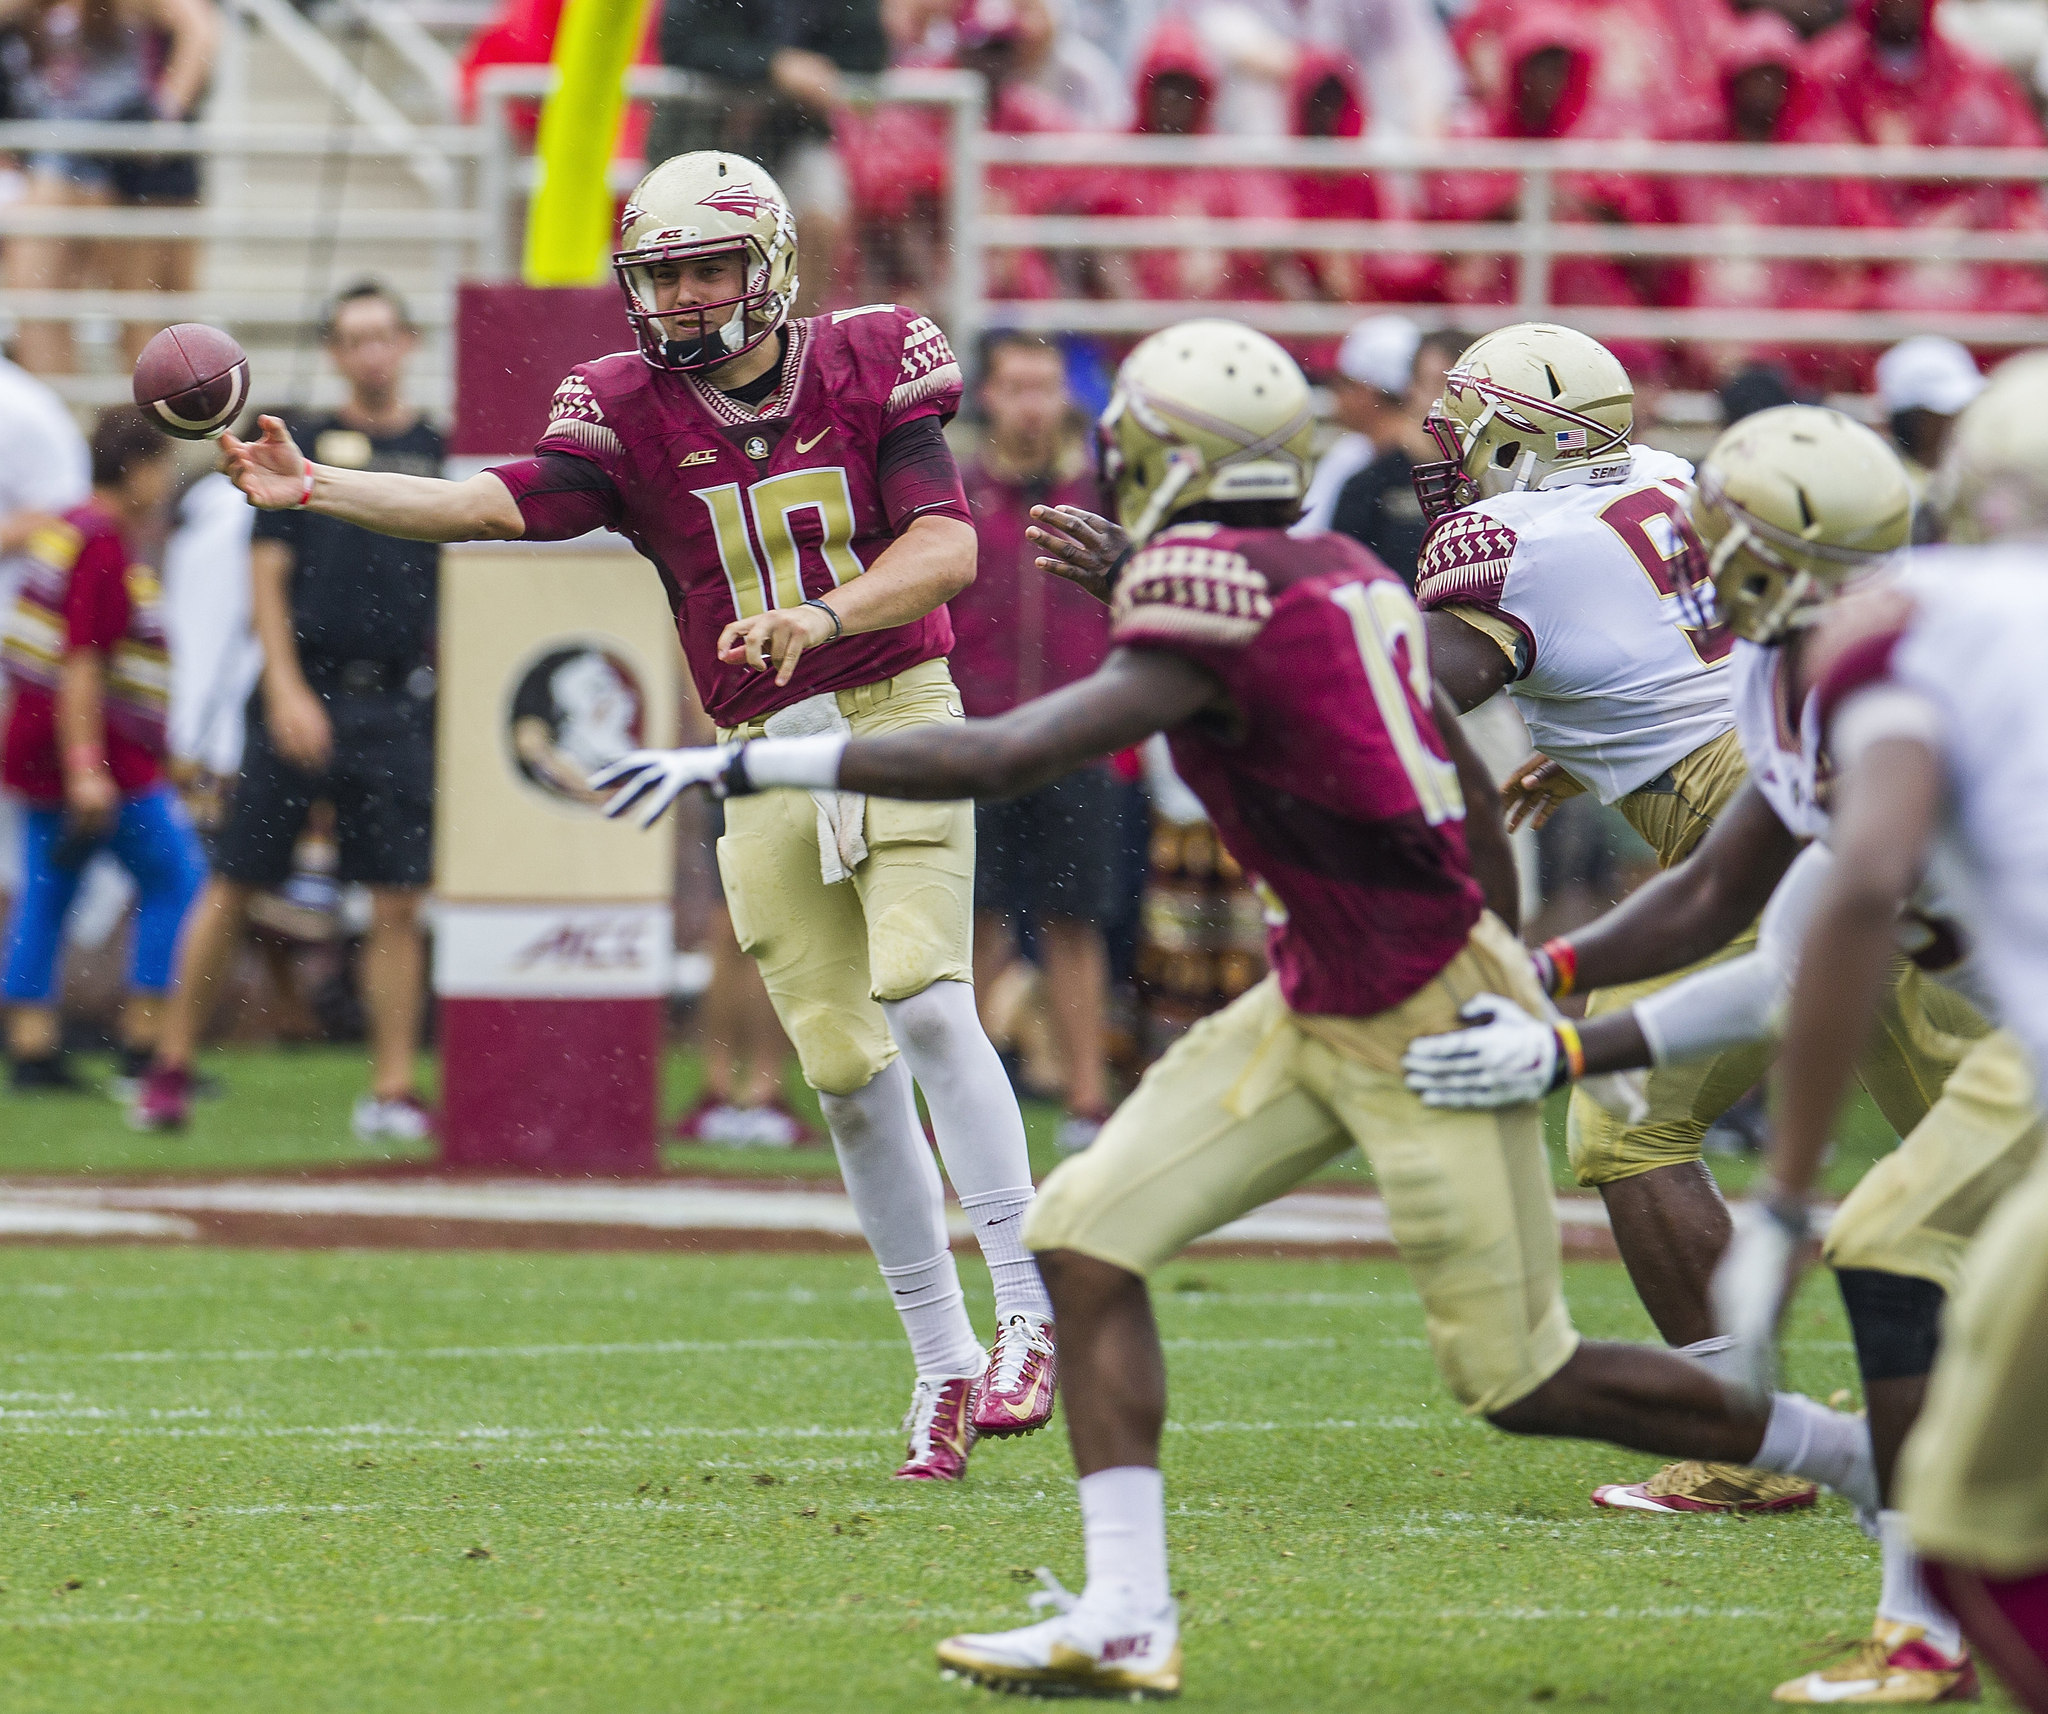 FSU lists Sean Maguire as starting QB, plus more depthchart notes and